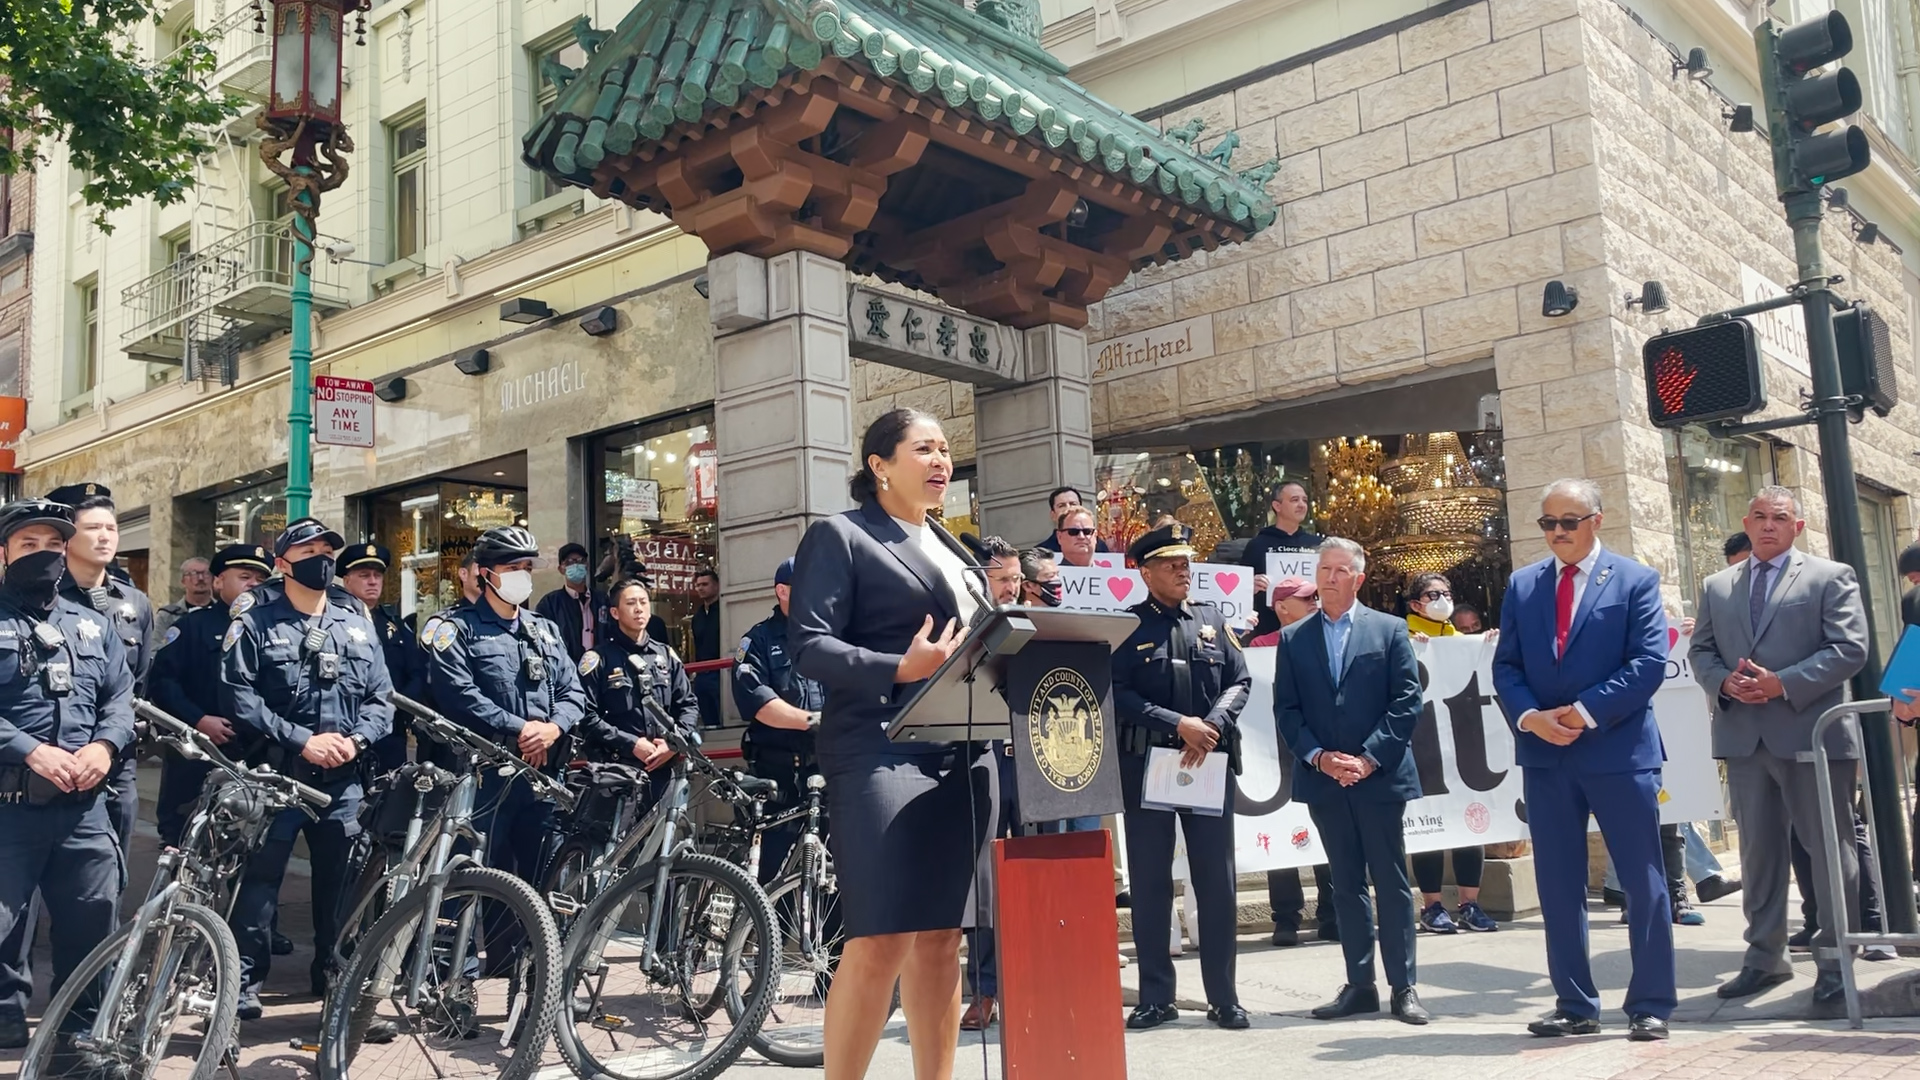 S.F. Leaders to Tourists: ‘This is a Safe City’